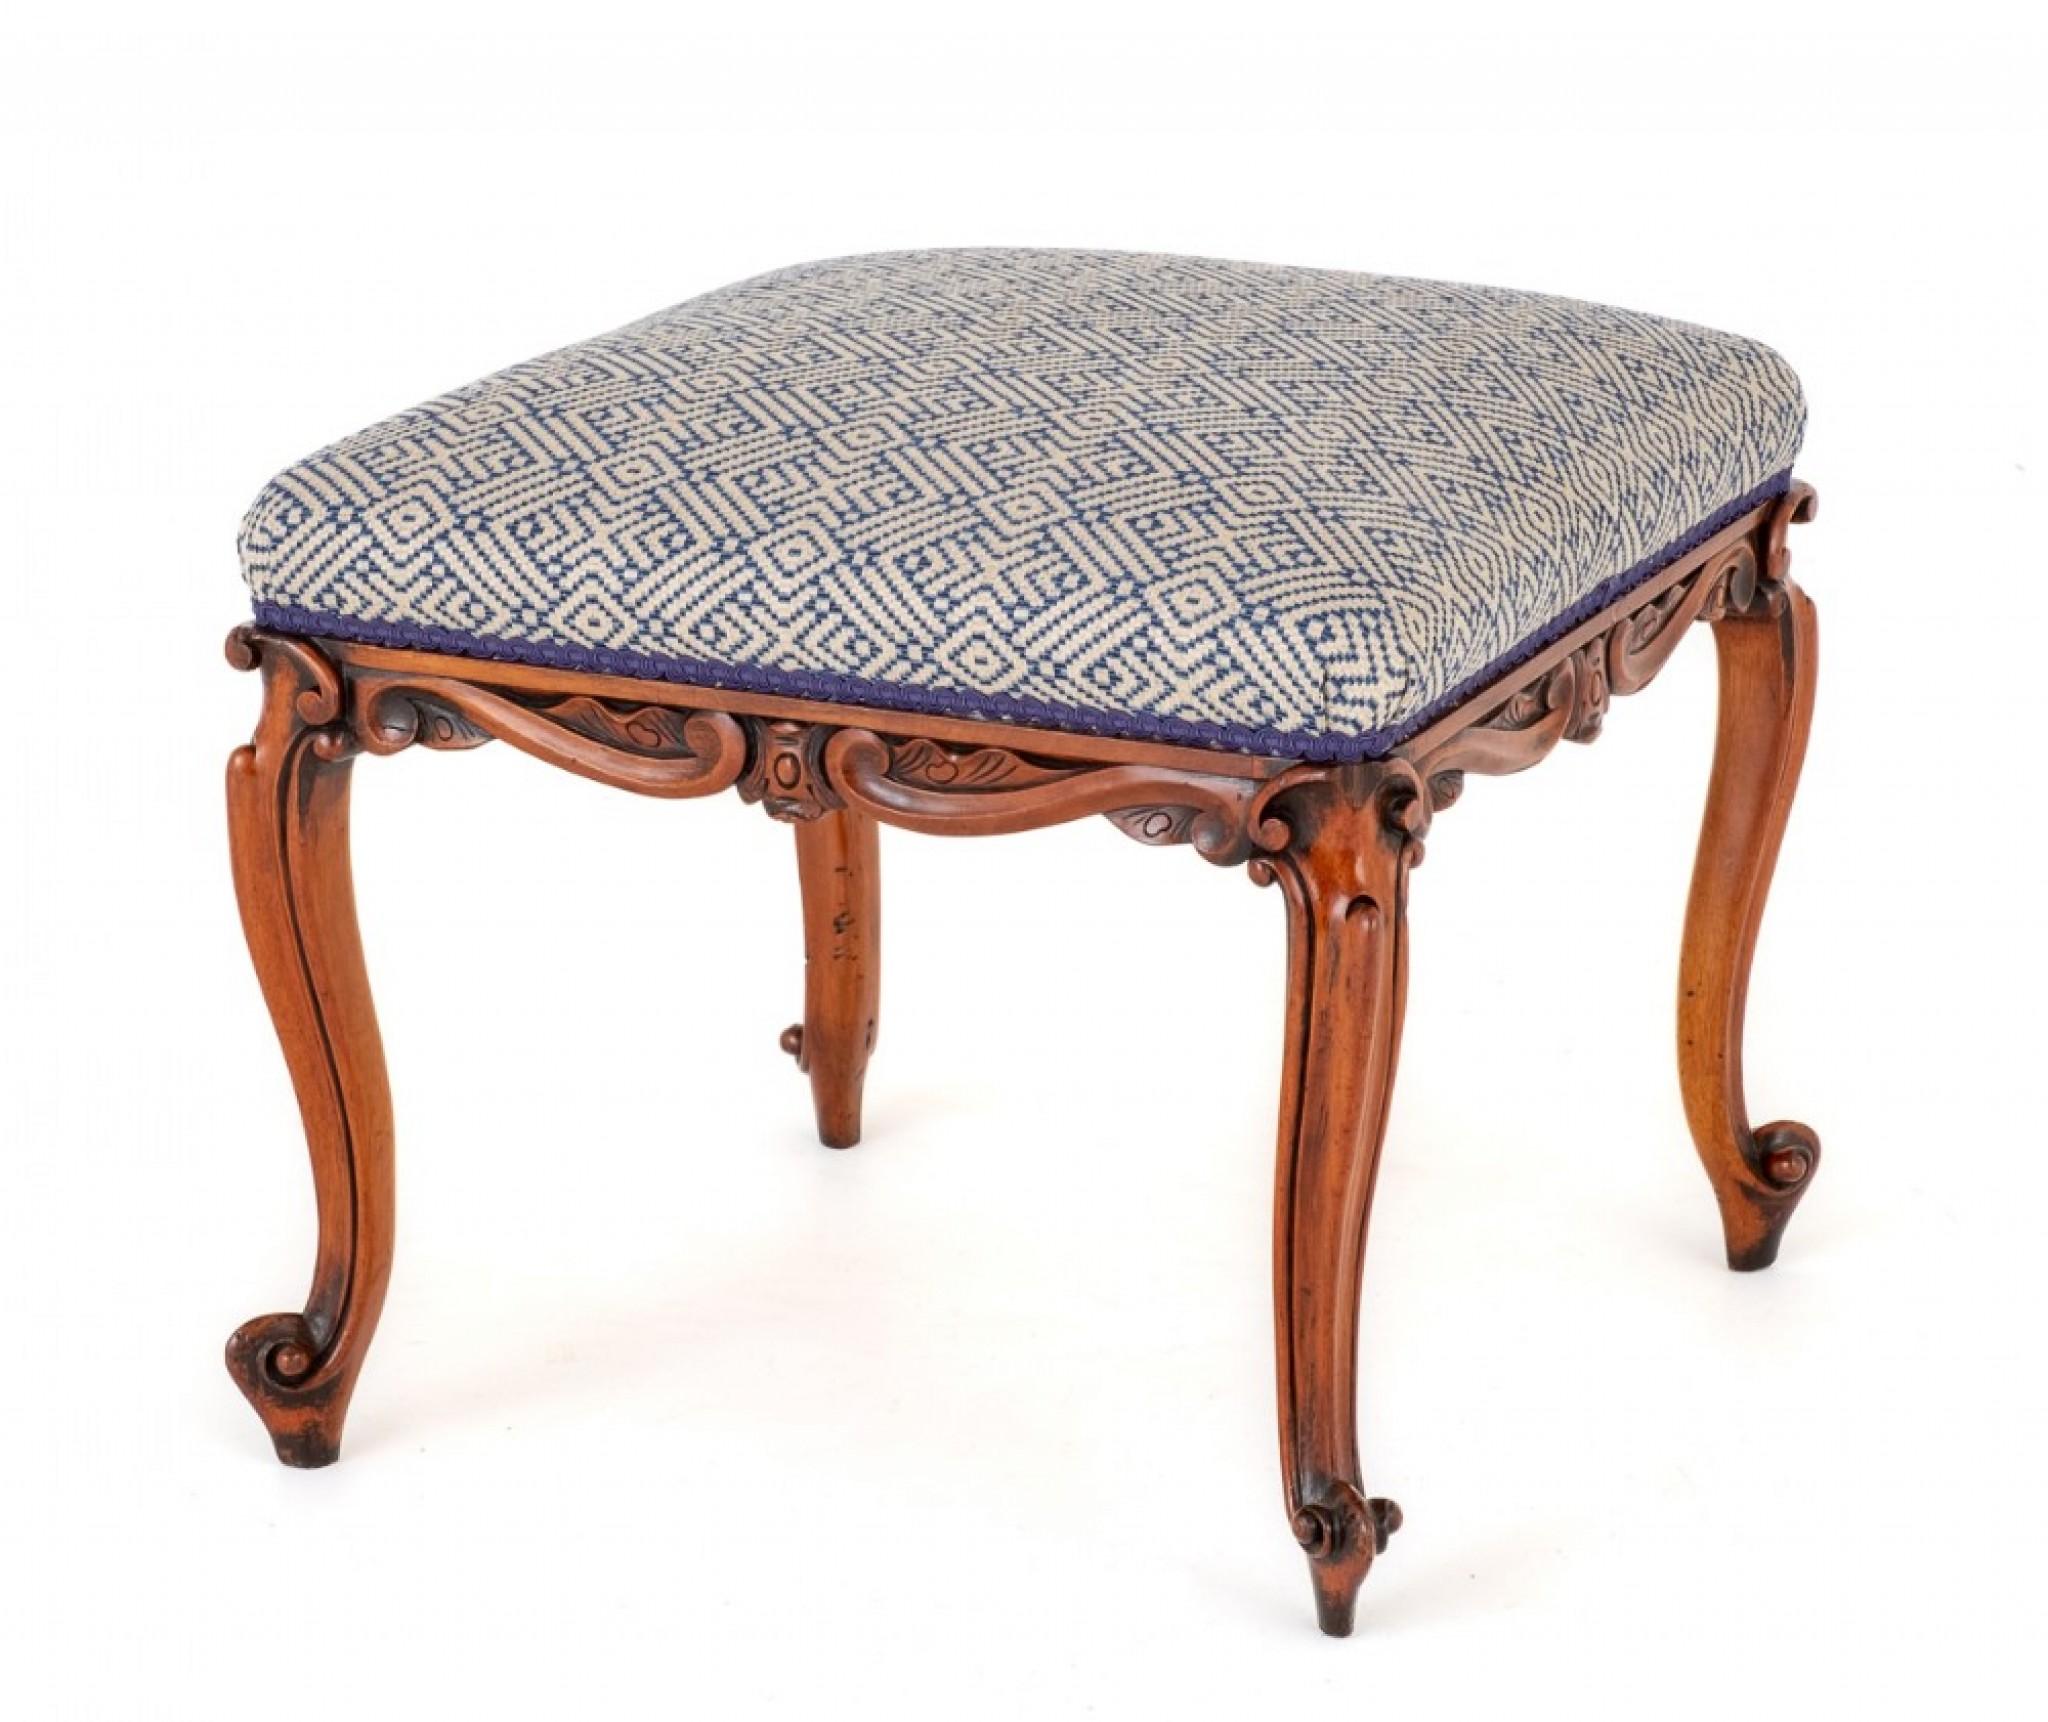 Victorian Mahogany Stool.
Circa 1860
Standing Upon Cabriole Legs with Carved French Style Toes and a Carved Frieze.
The Stool Has recently Been Reupholstered in a Quality fabric.
Presented in good condition.